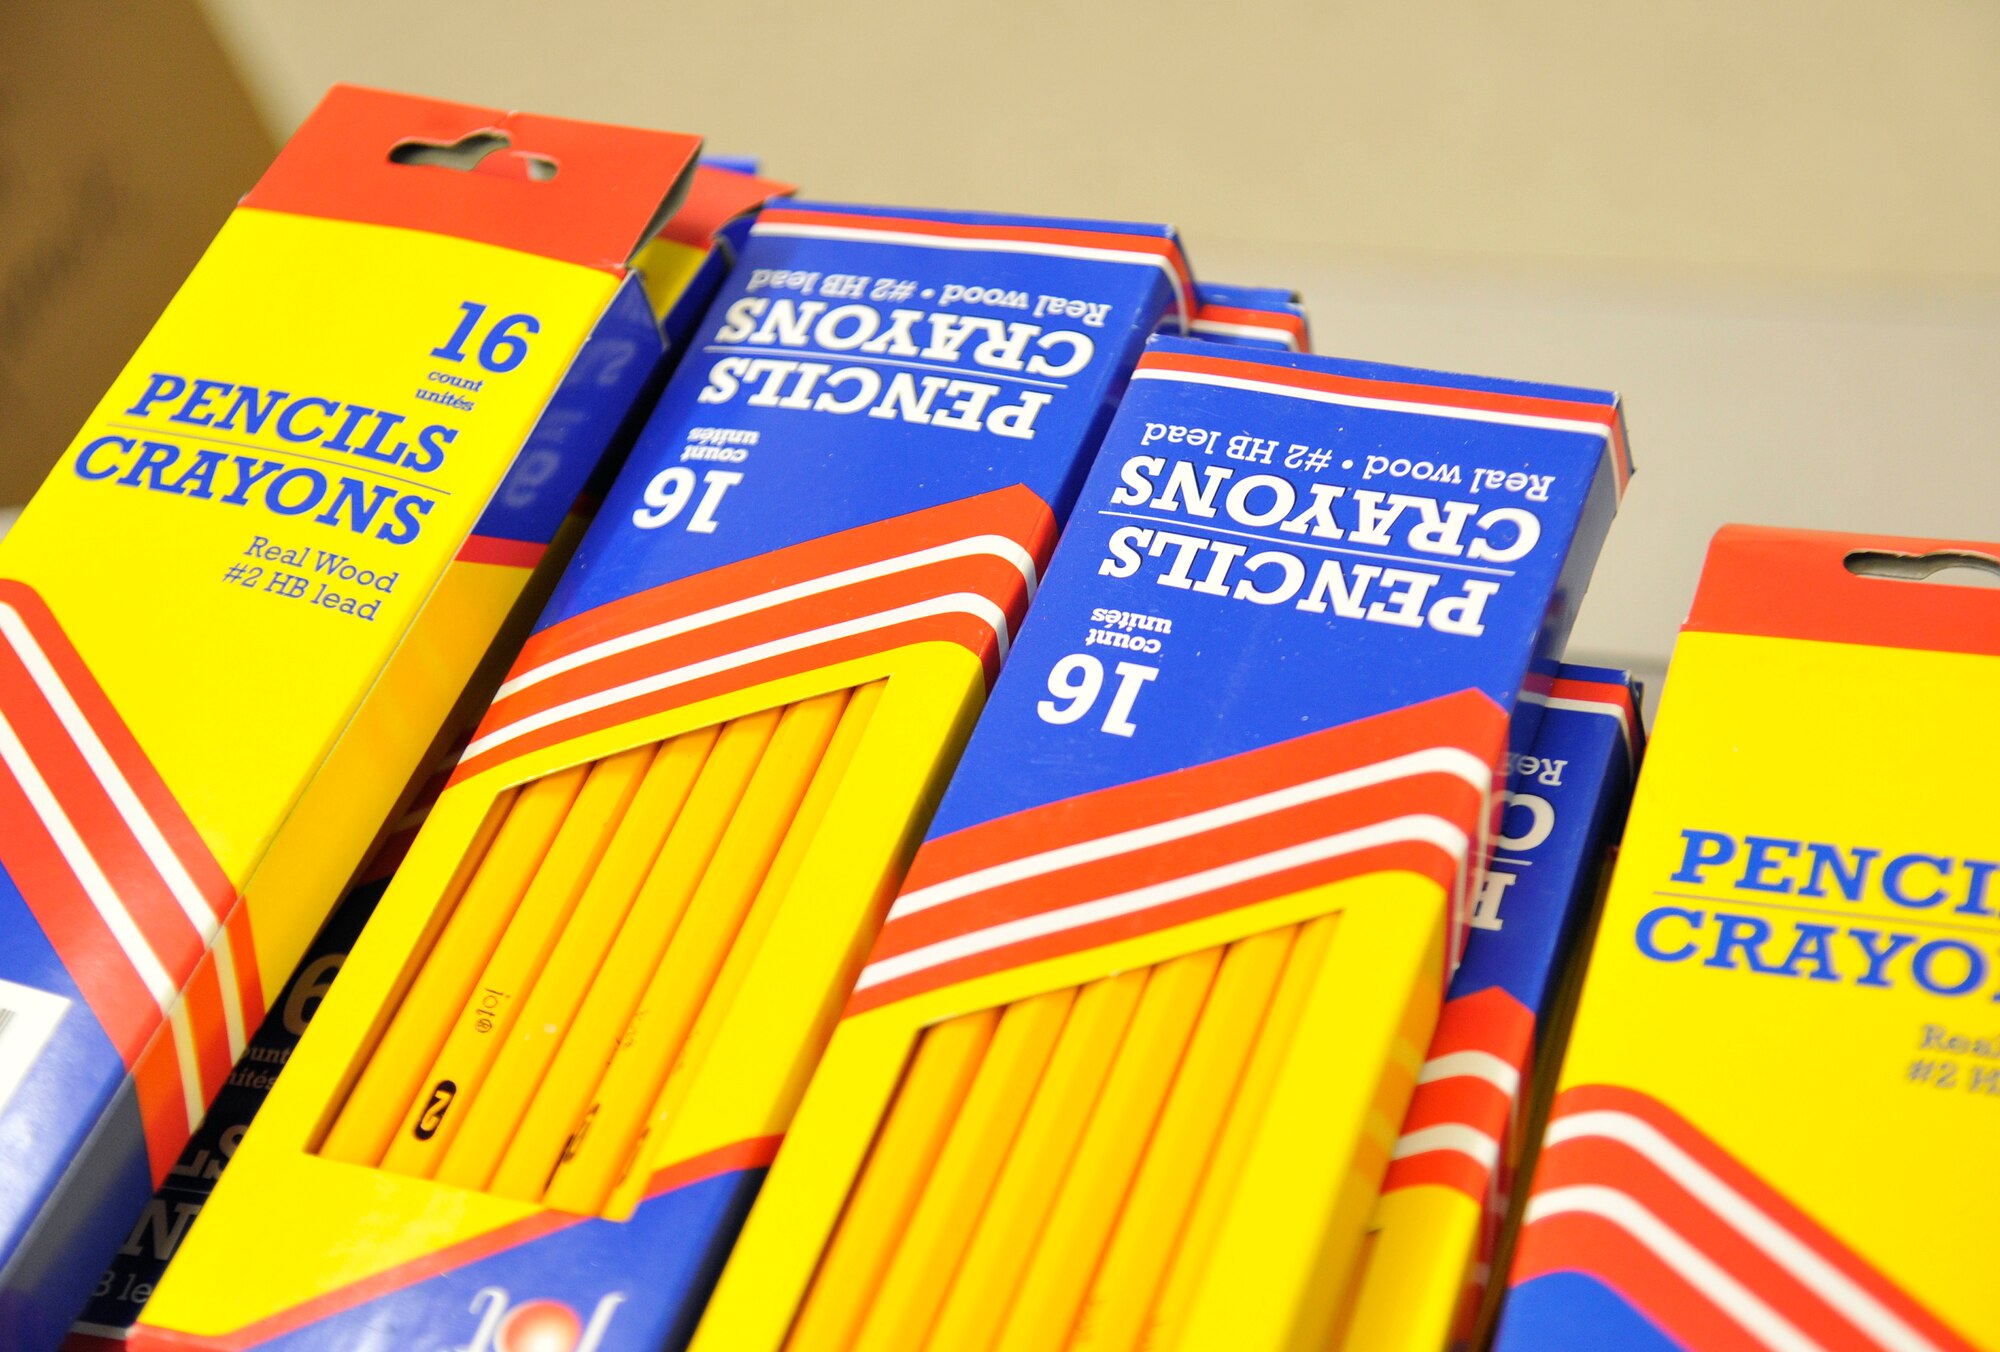 Basic #2 pencils are set on display for military families to pick up during the Back-to-School Brigade in the Michael Anderson Elementary School gymnasium at Fairchild Air Force Base, Washington, Aug. 7, 2014. The Back-to-School Brigade is hosted by Operation Homefront and is just one way they provide assistance to military families and wounded warriors. (U.S. Air Force photo by Senior Airman Ryan Zeski/Released)